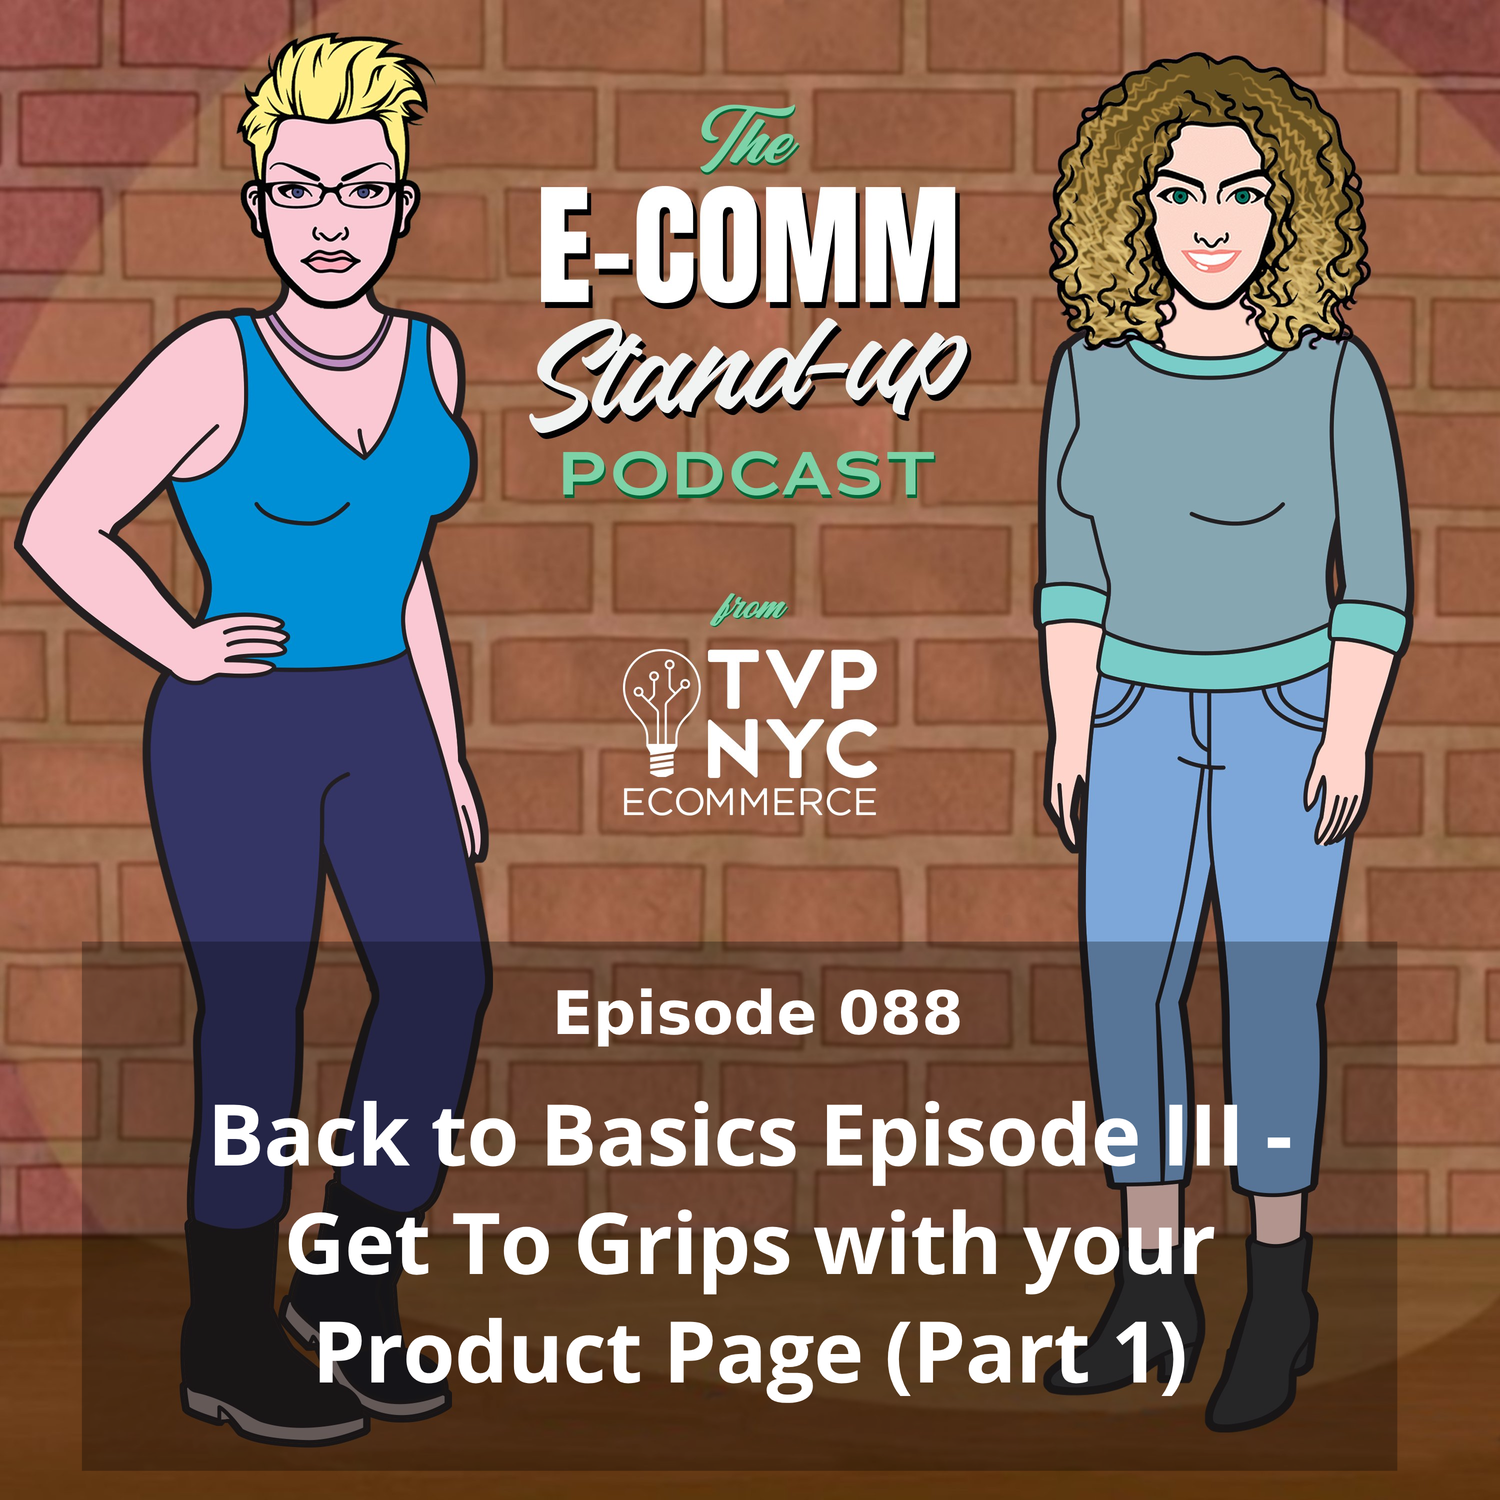 Back to Basics Episode III - Get To Grips with your Product Page (Part 1)